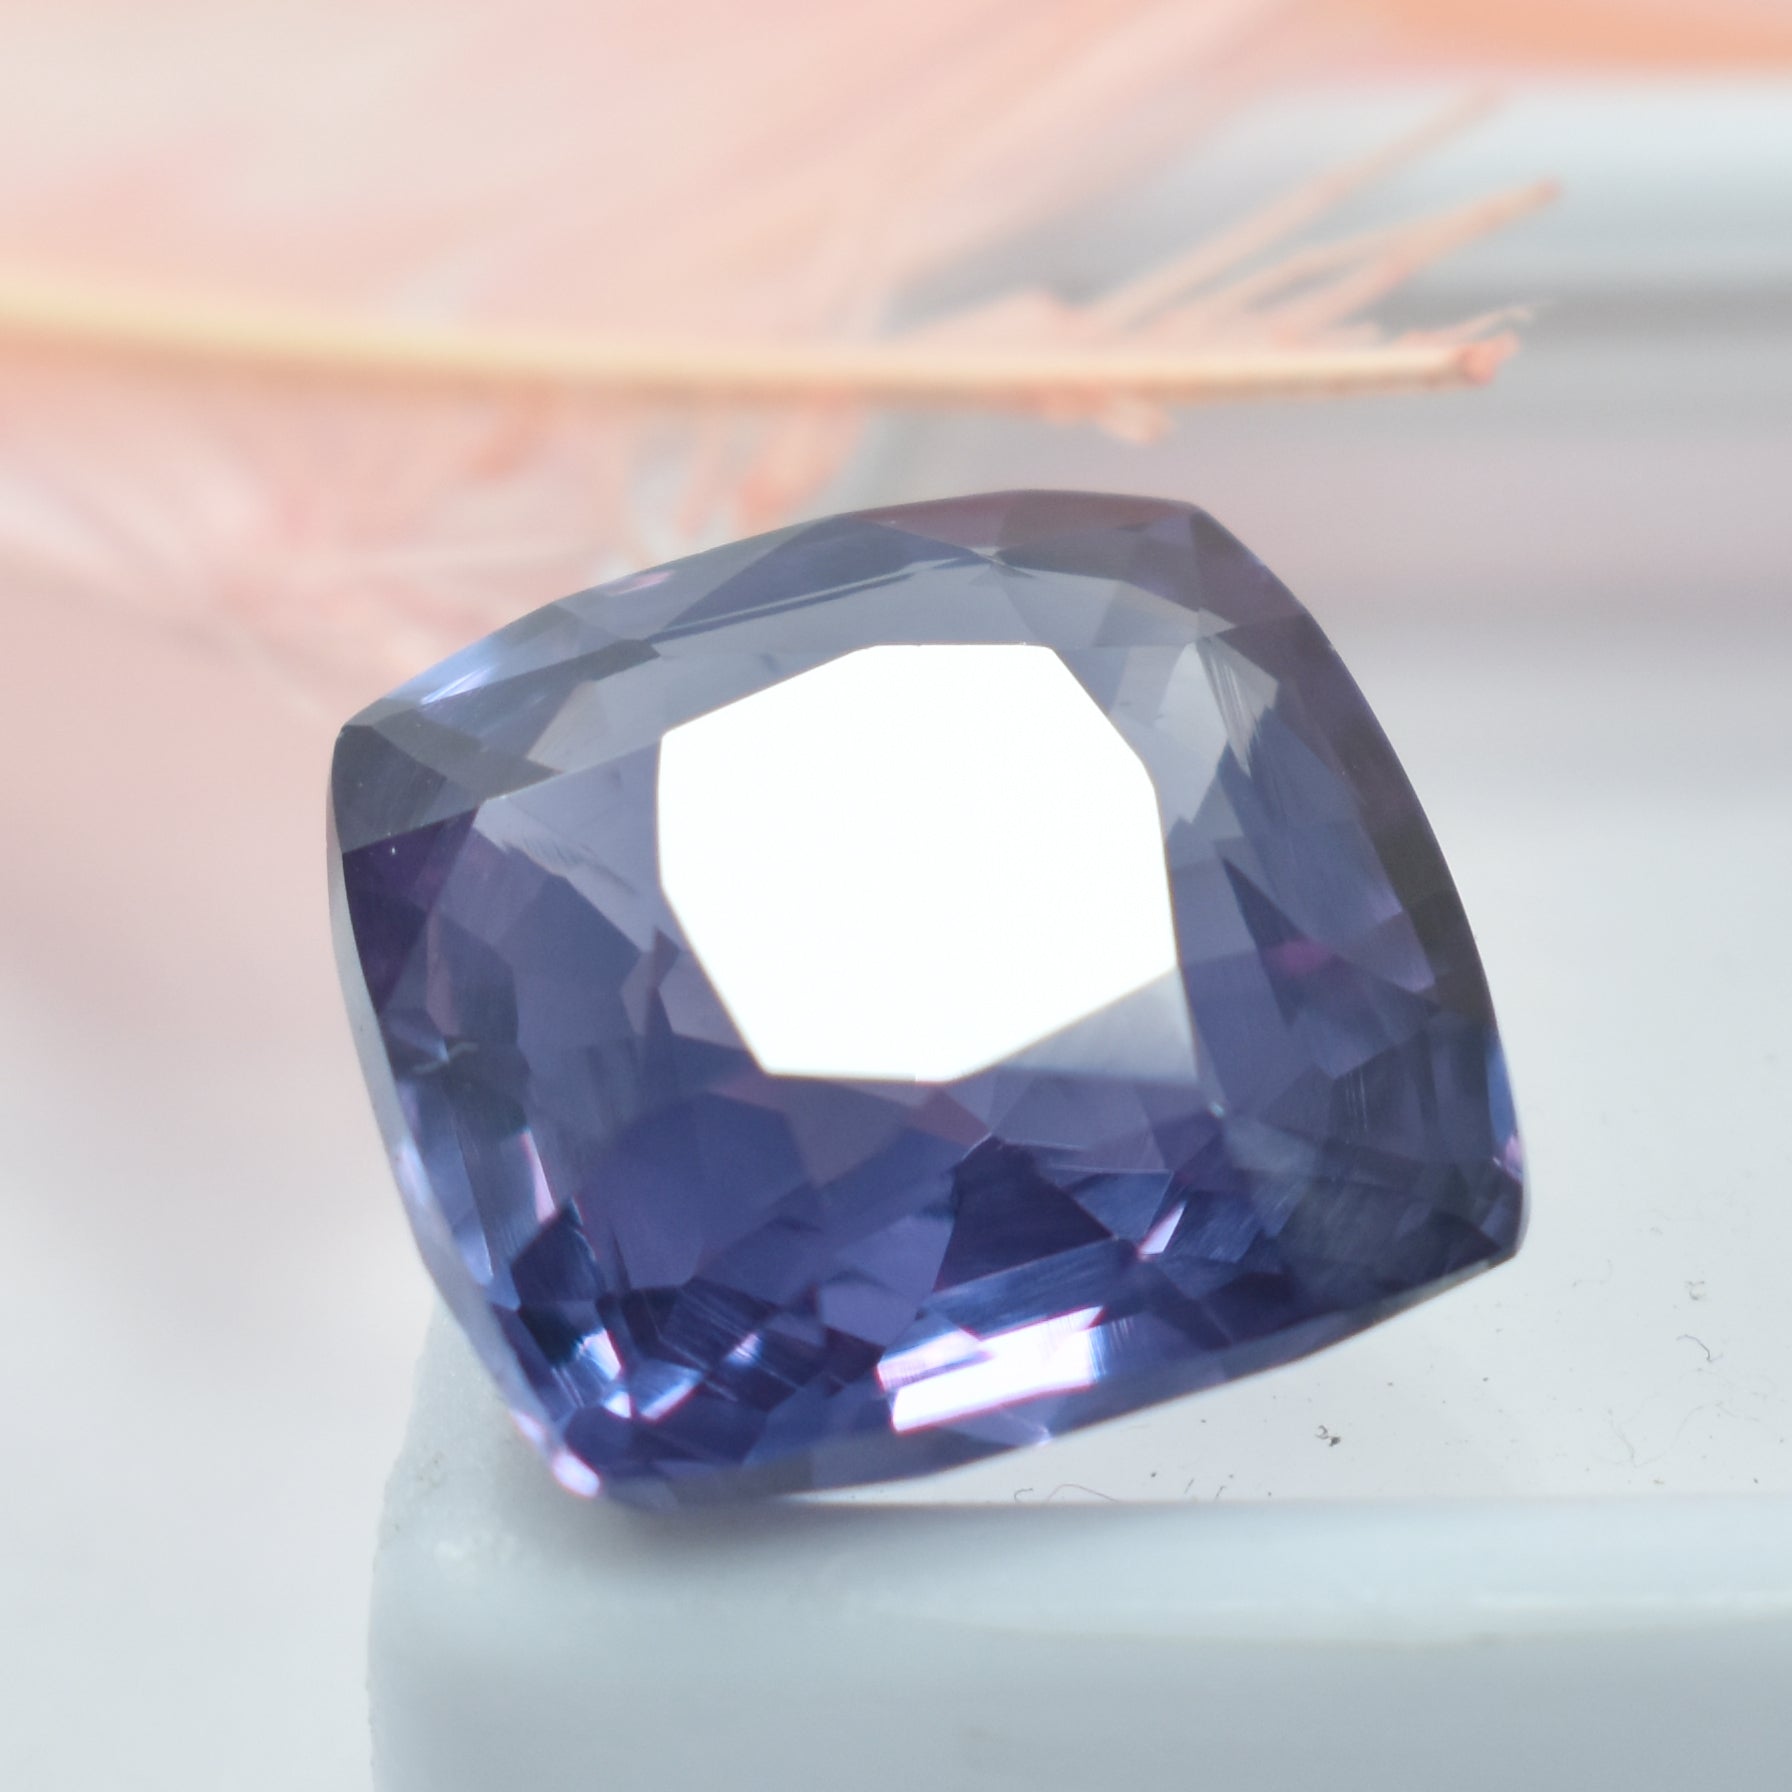 Perfect Color-Change 9.40 Carat Square Cushion Cut Natural Alexandrite Loose Gemstone Rare and Valuable Alex Stone